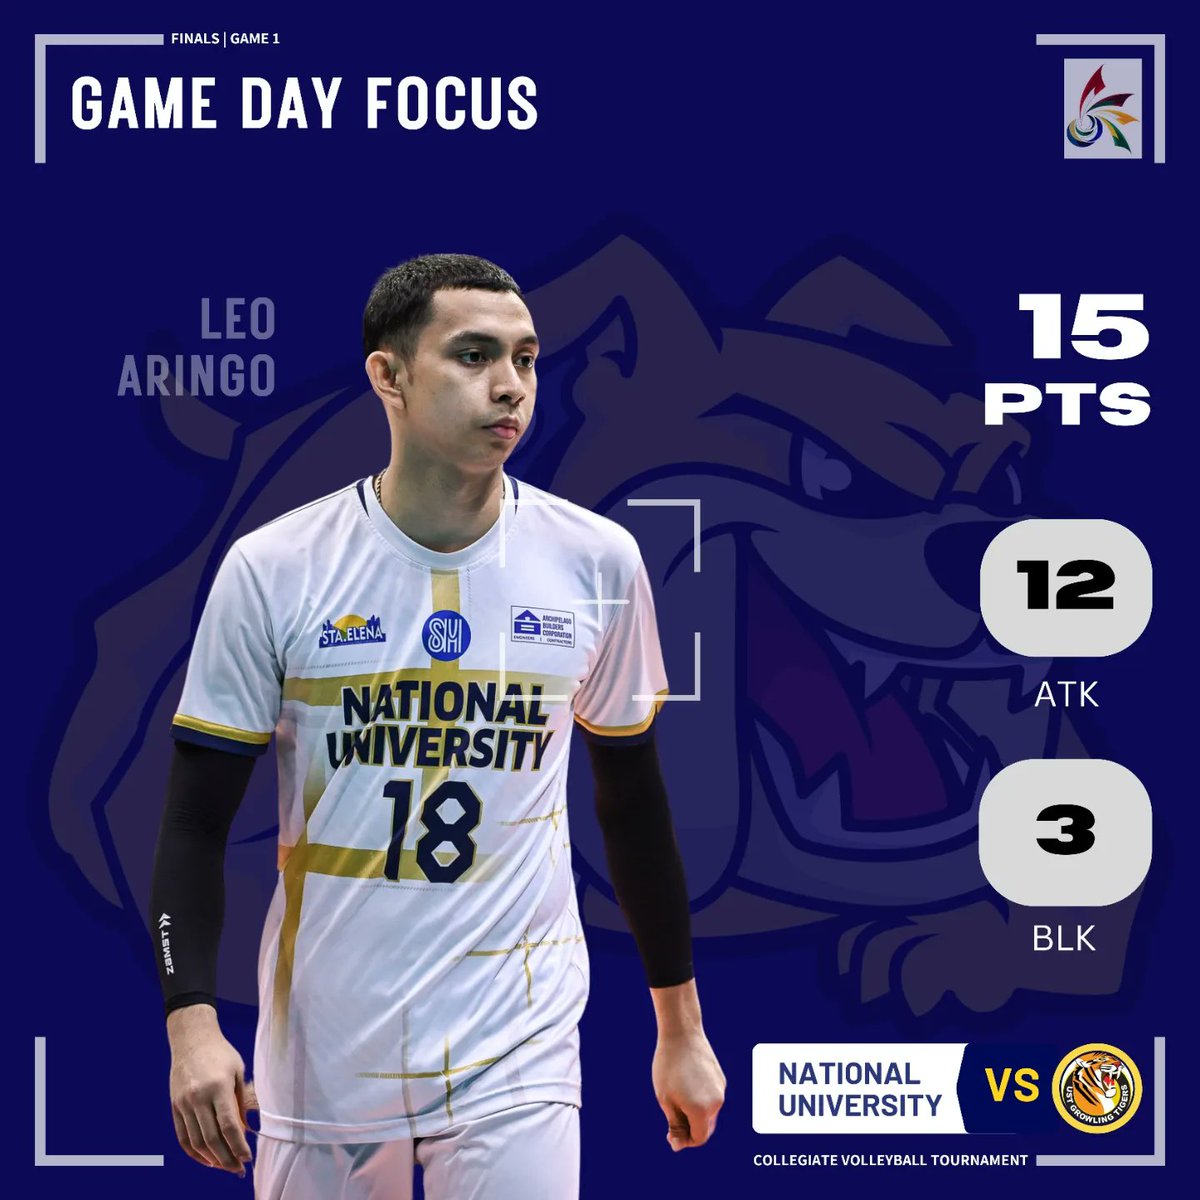 ONE DOWN, ONE TO GO! 💛💙

The NU Bulldogs secured the Game 1 of the Finals series after sweeping UST, 25-17, 26-24, 25-19, today at the SMART Araneta Coliseum.

Player of the Game: Leo Aringo
15 points - 12 attacks and 3 blocks

📷: UAAP Media Bureau 
#GoBulldogs #UAAPSeason86